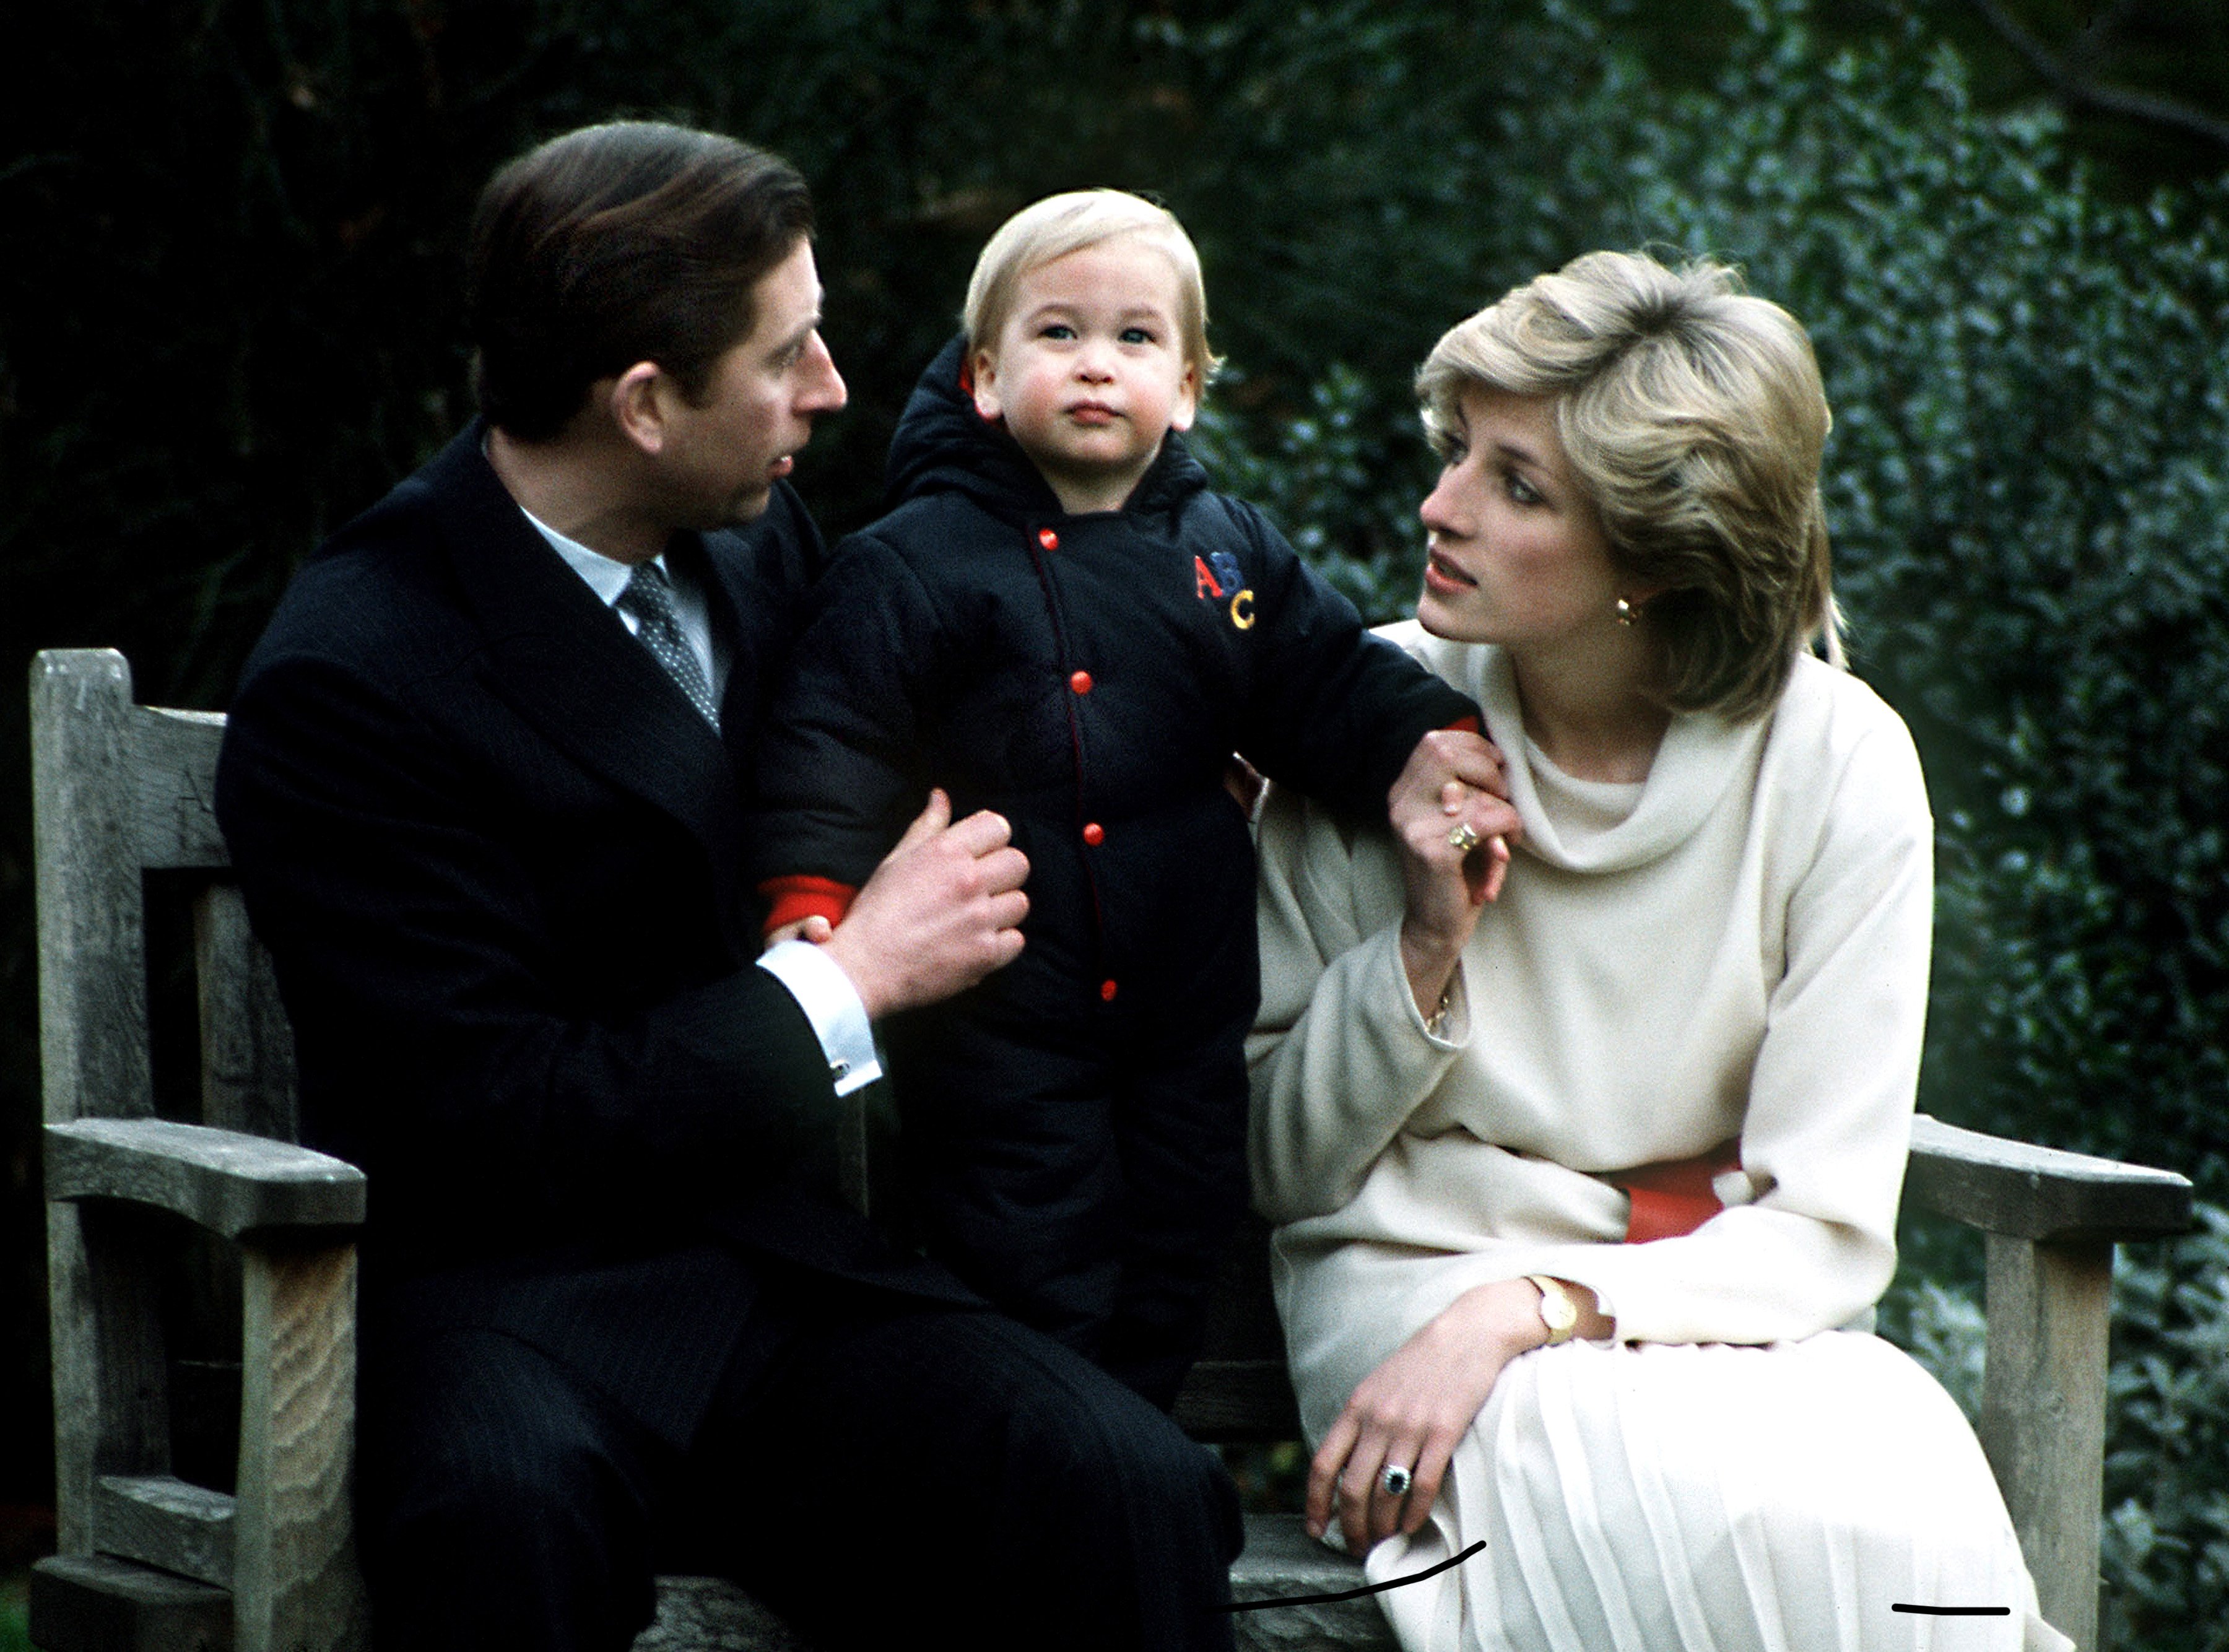 Prince Charles and Princess Diana with their son Prince William at his first official photo-call in the garden on December 14, 1983 at Kensington Palace, London. / Source: Getty Images